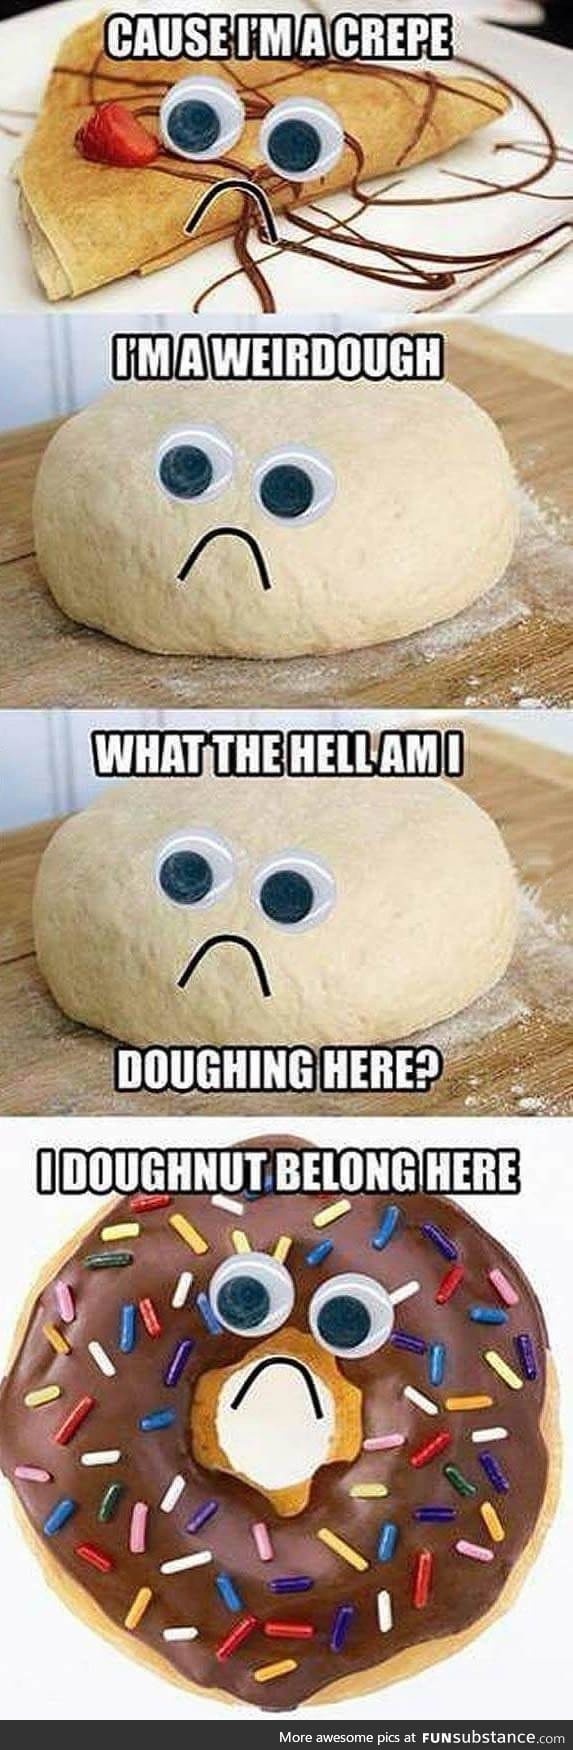 What am I dough-ing here?